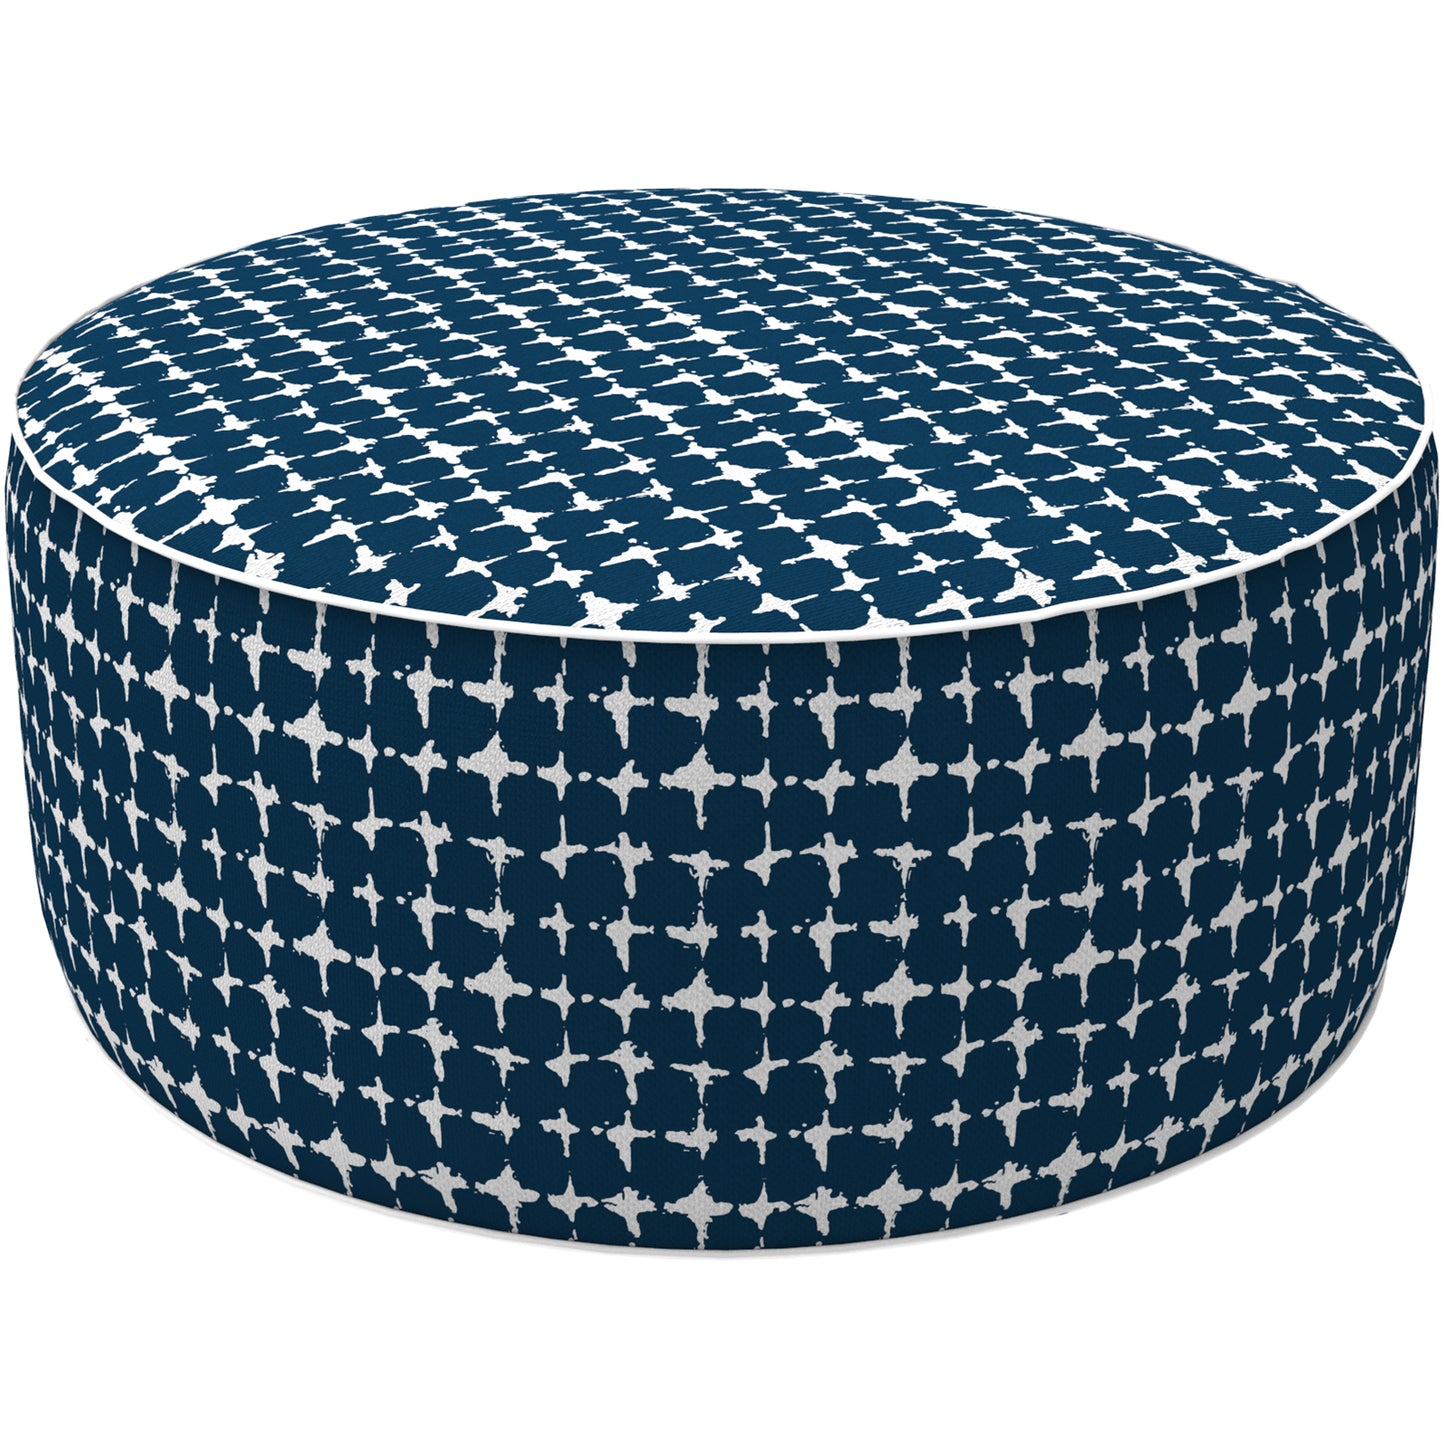 Melody Elephant Patio Inflatable Ottoman, 21x9 Inch Portable Stool Ottoman with Handle, Outdoor Round Footrest Stool for Garden Camping, Tie-Dye Navy